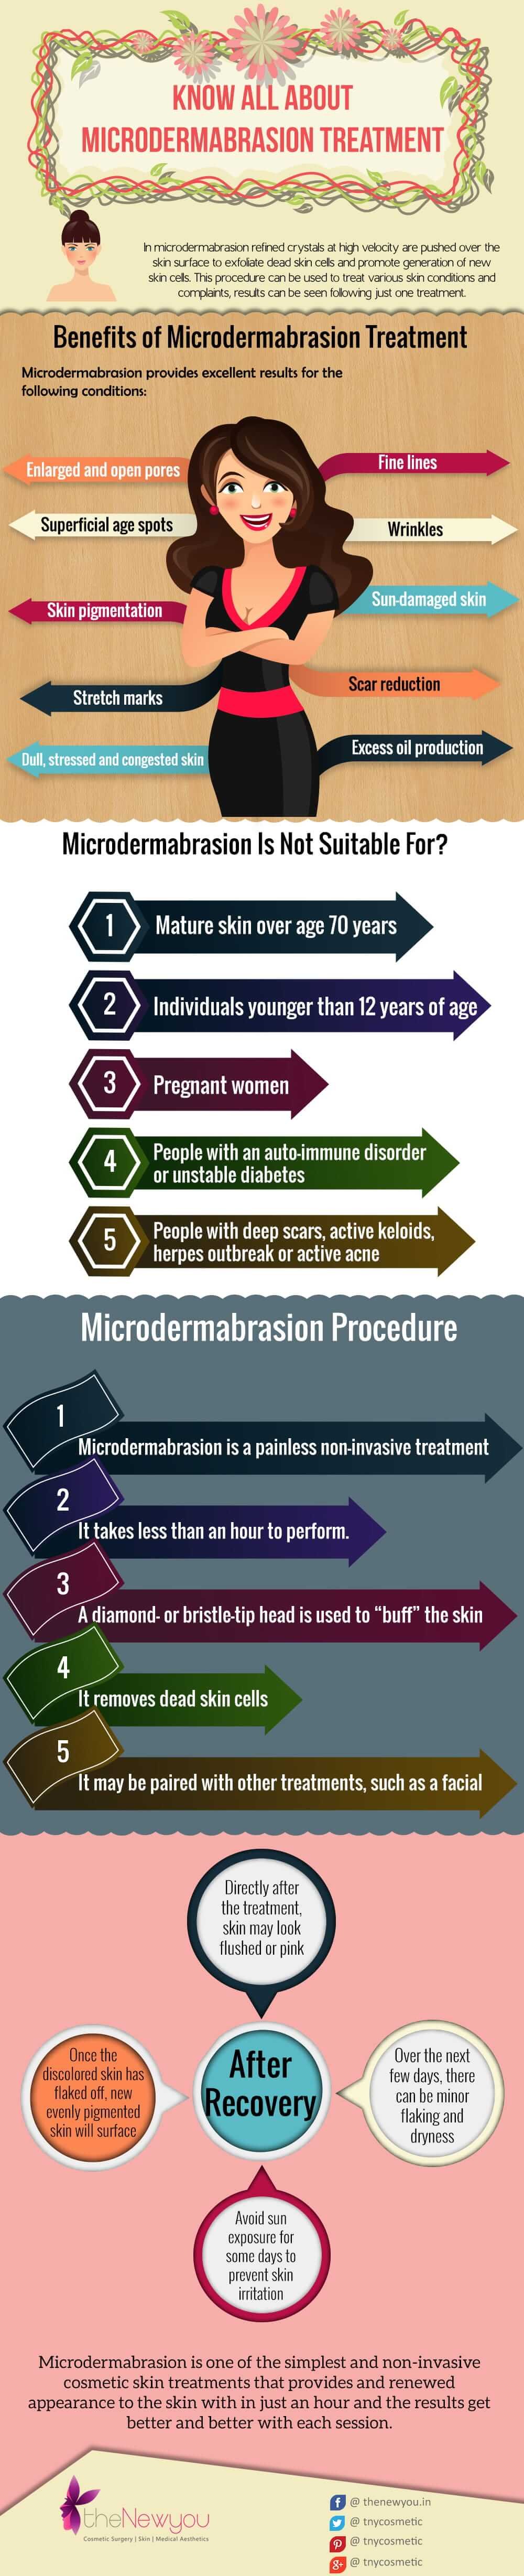 KnowAllAboutMicrodermabrasionTreatment